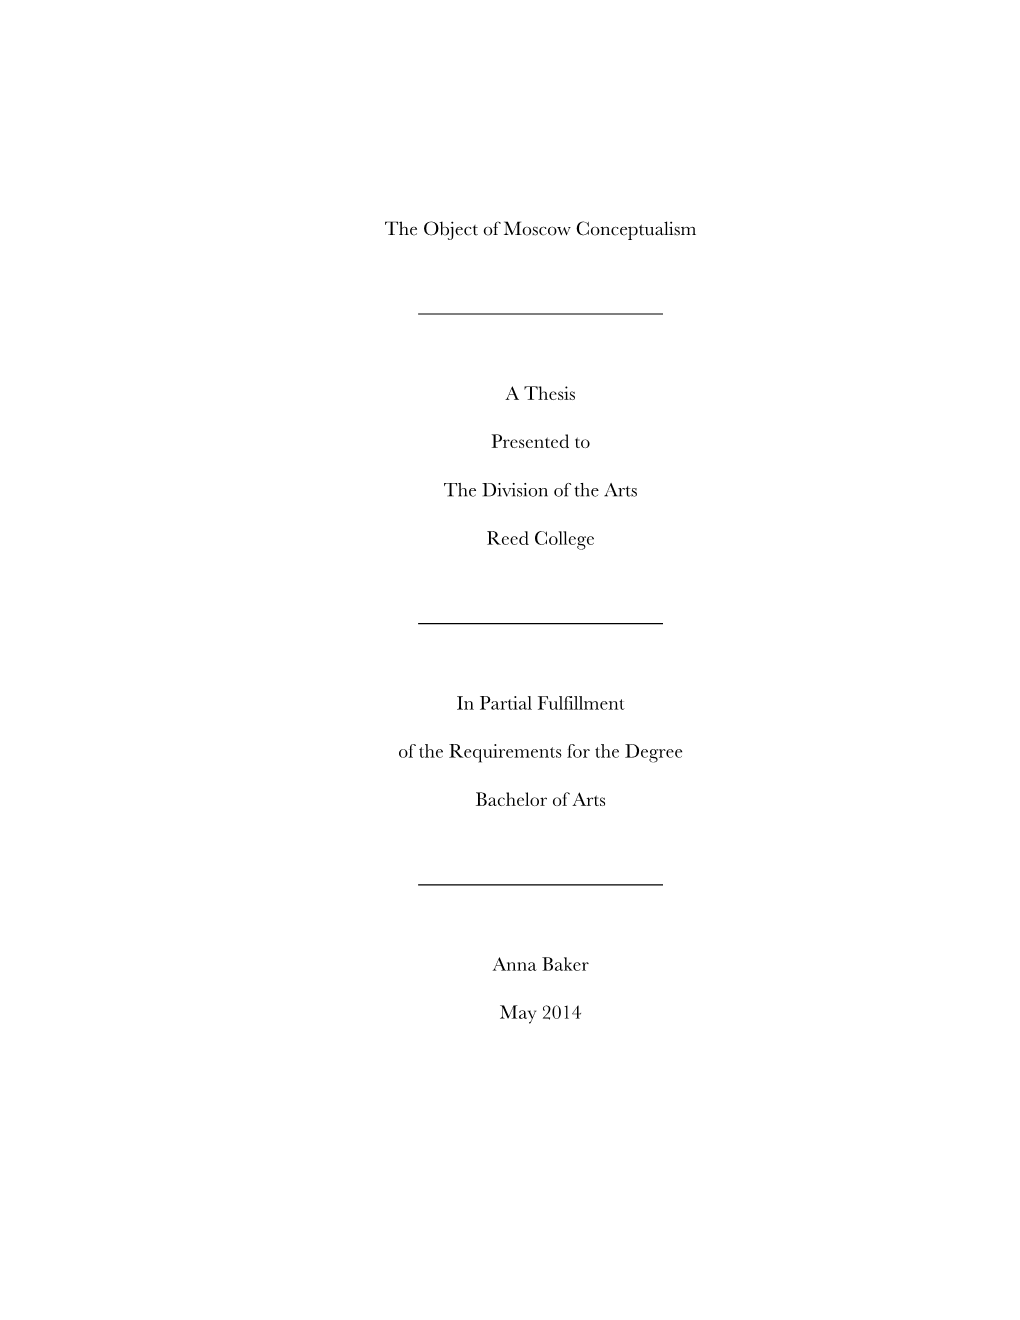 The Object of Moscow Conceptualism a Thesis Presented to the Division